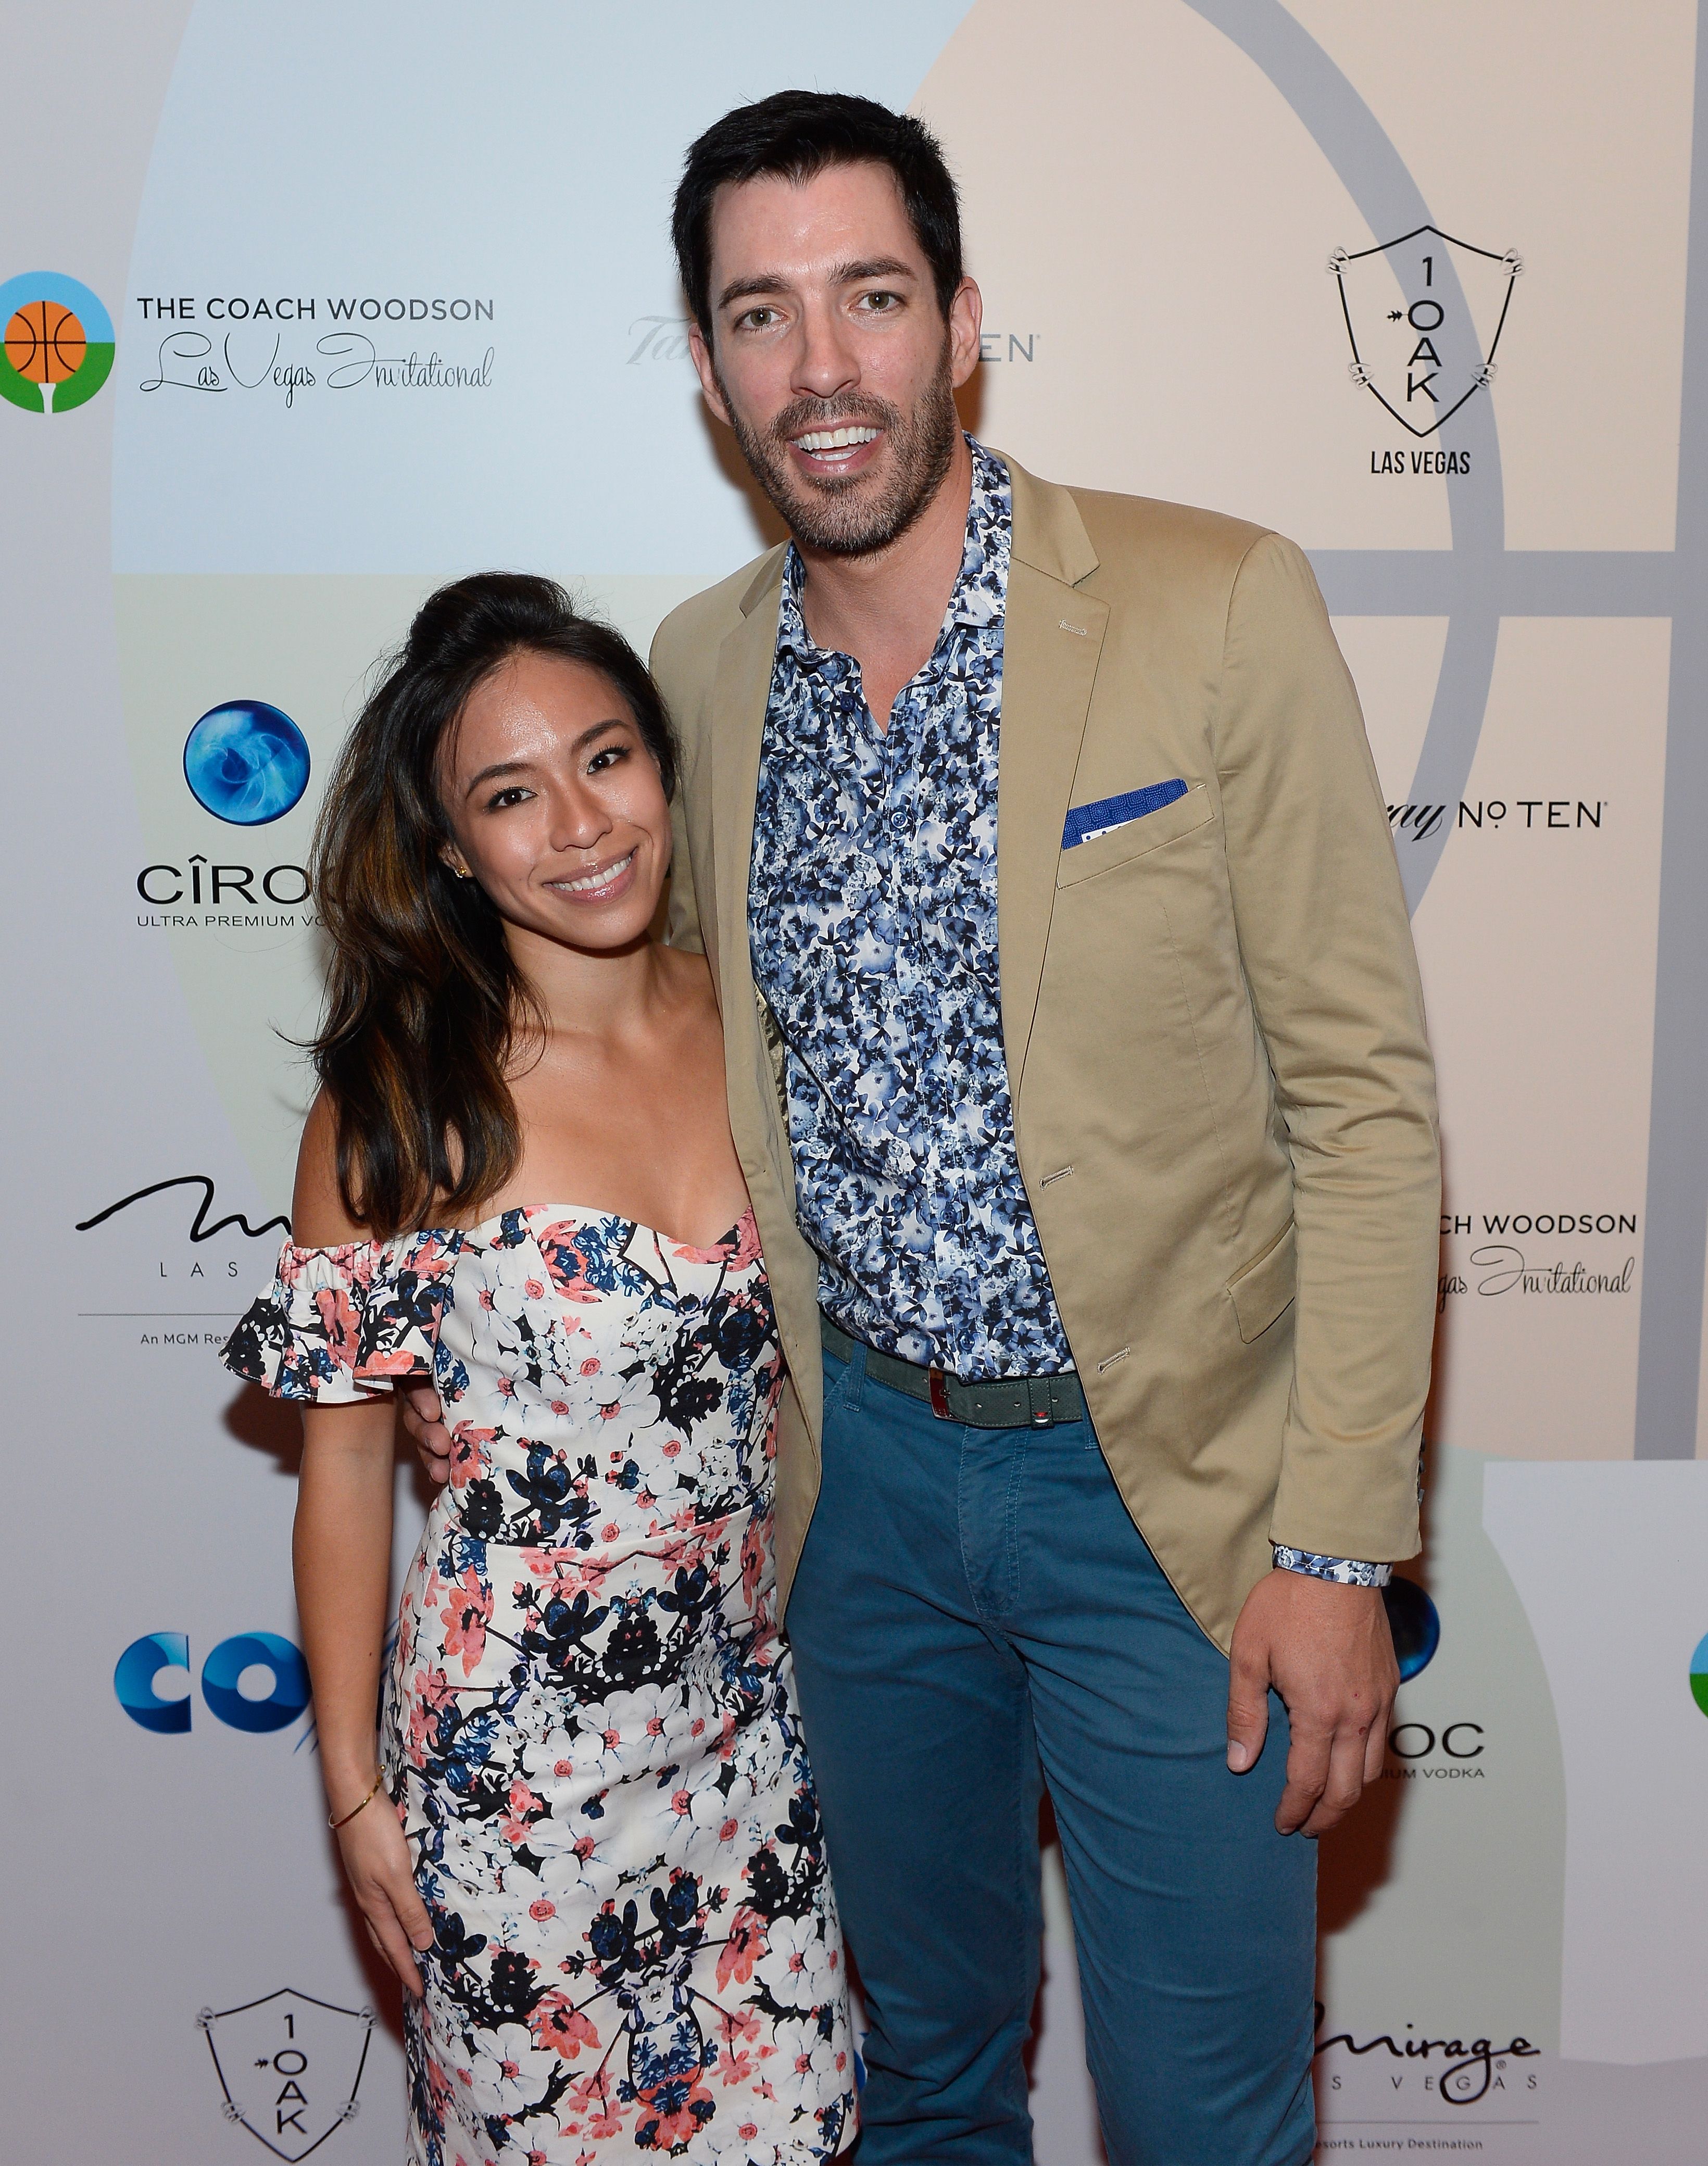 Linda Phan and Drew Scott at the Coach Woodson Las Vegas Invitational red carpet and pairings gala on July 8, 2017, in Las Vegas, Nevada. | Source: Bryan Steffy/Getty Images